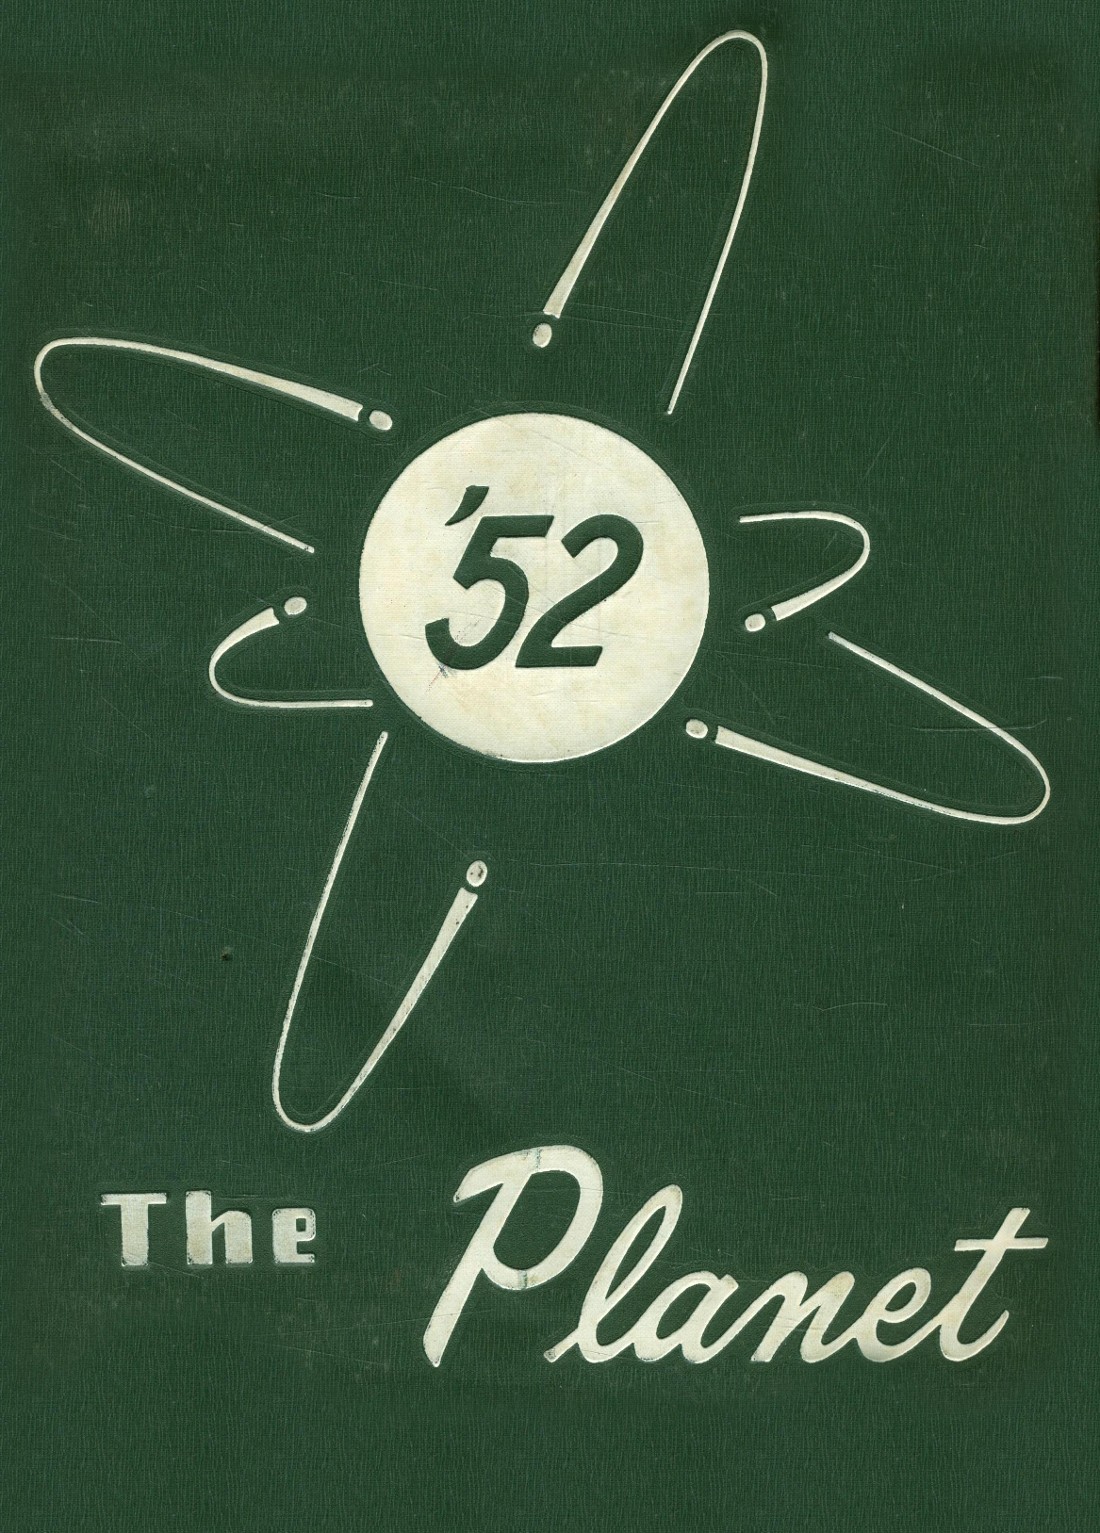 1952 yearbook from Mars High School from Mars, Pennsylvania